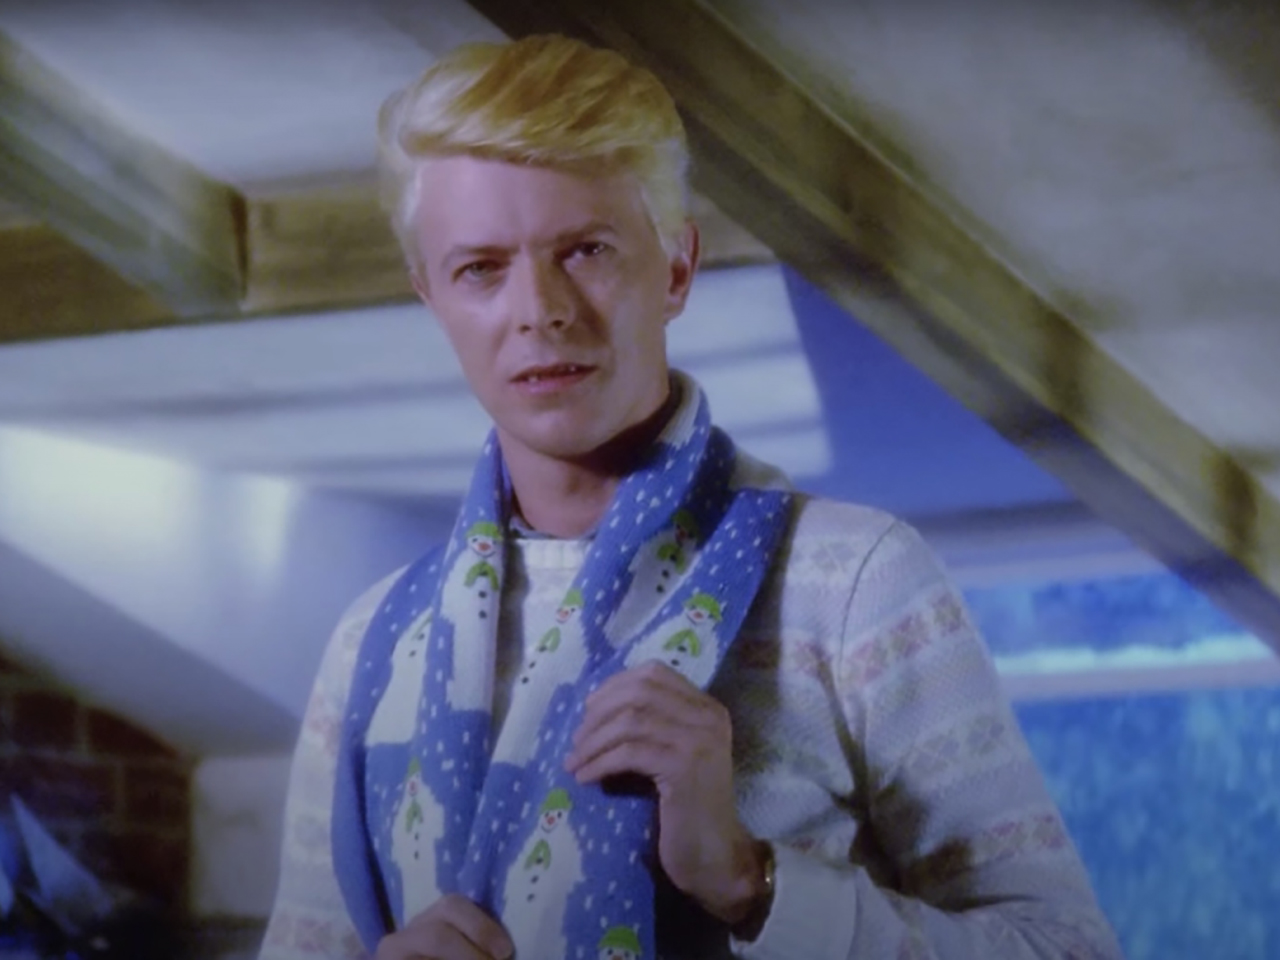 An image of David Bowie